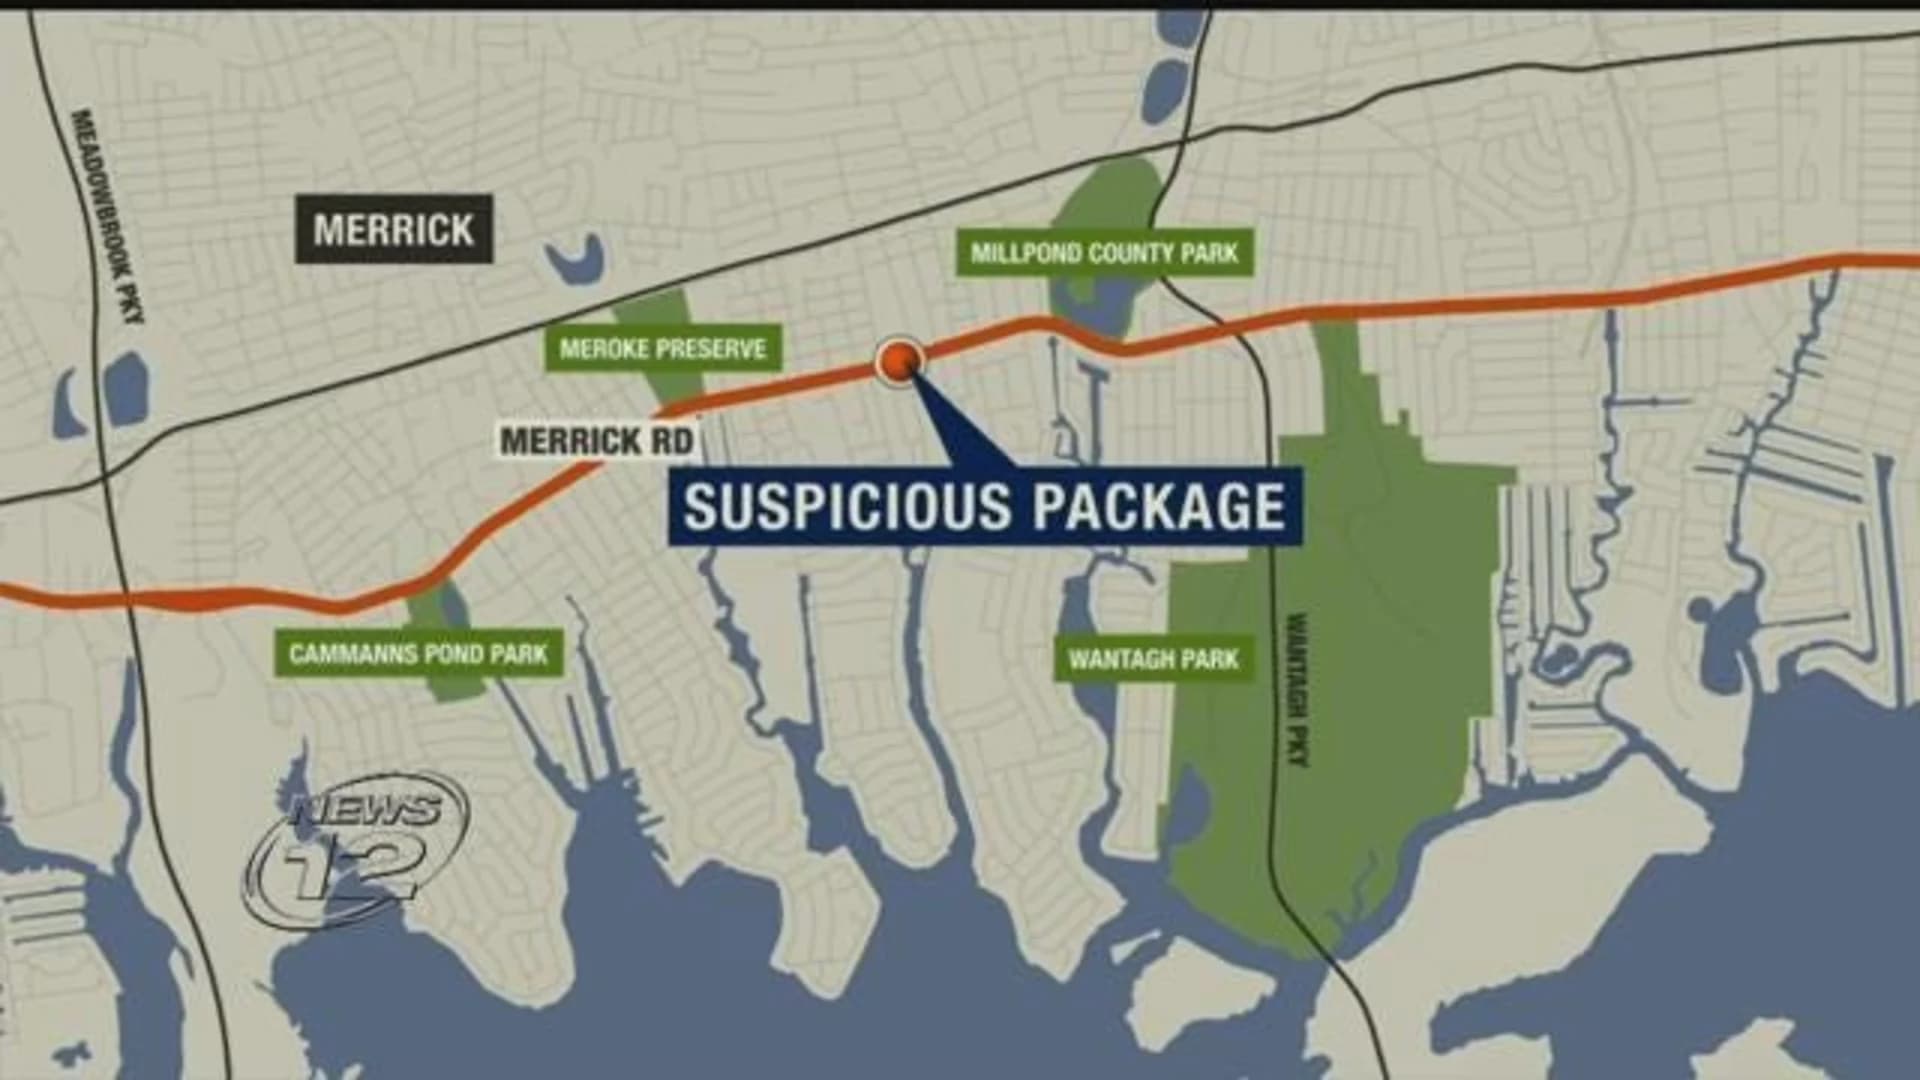 NCPD: Suspicious package found in Bellmore was empty bag